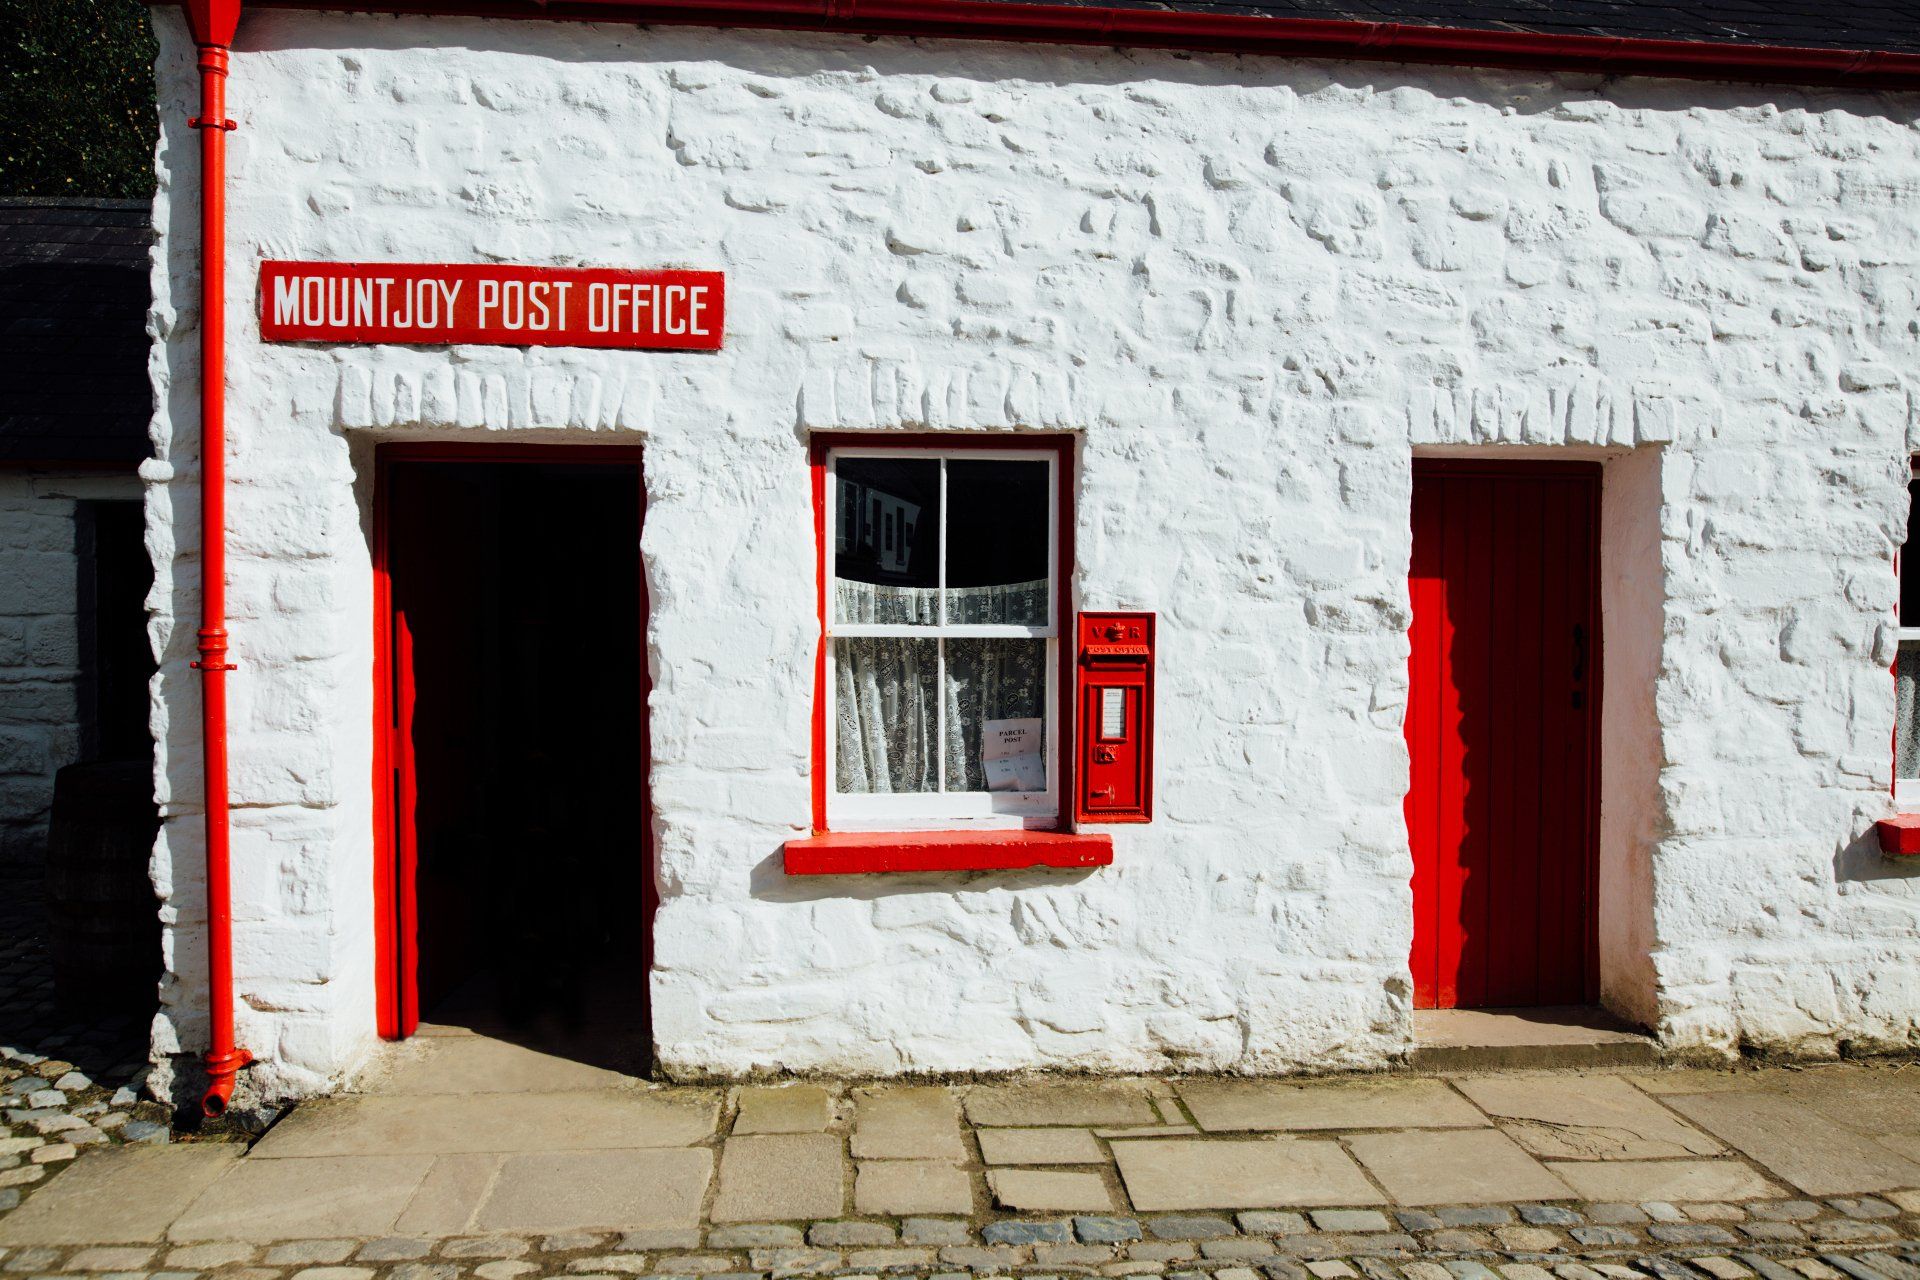 Image of a post office